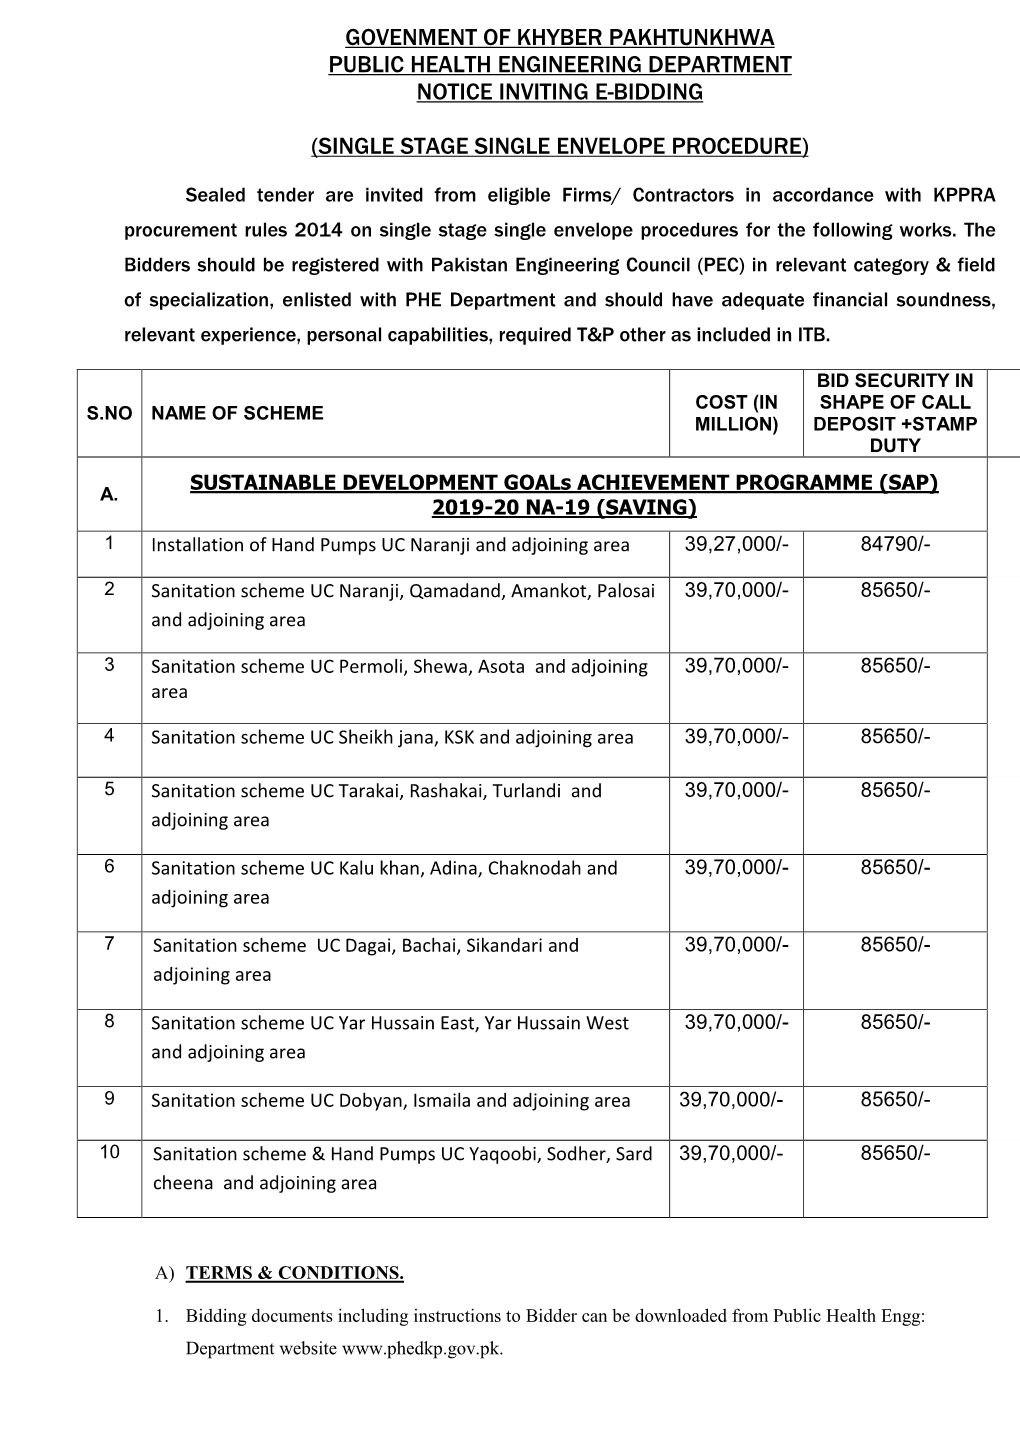 Govenment of Khyber Pakhtunkhwa Public Health Engineering Department Notice Inviting E-Bidding